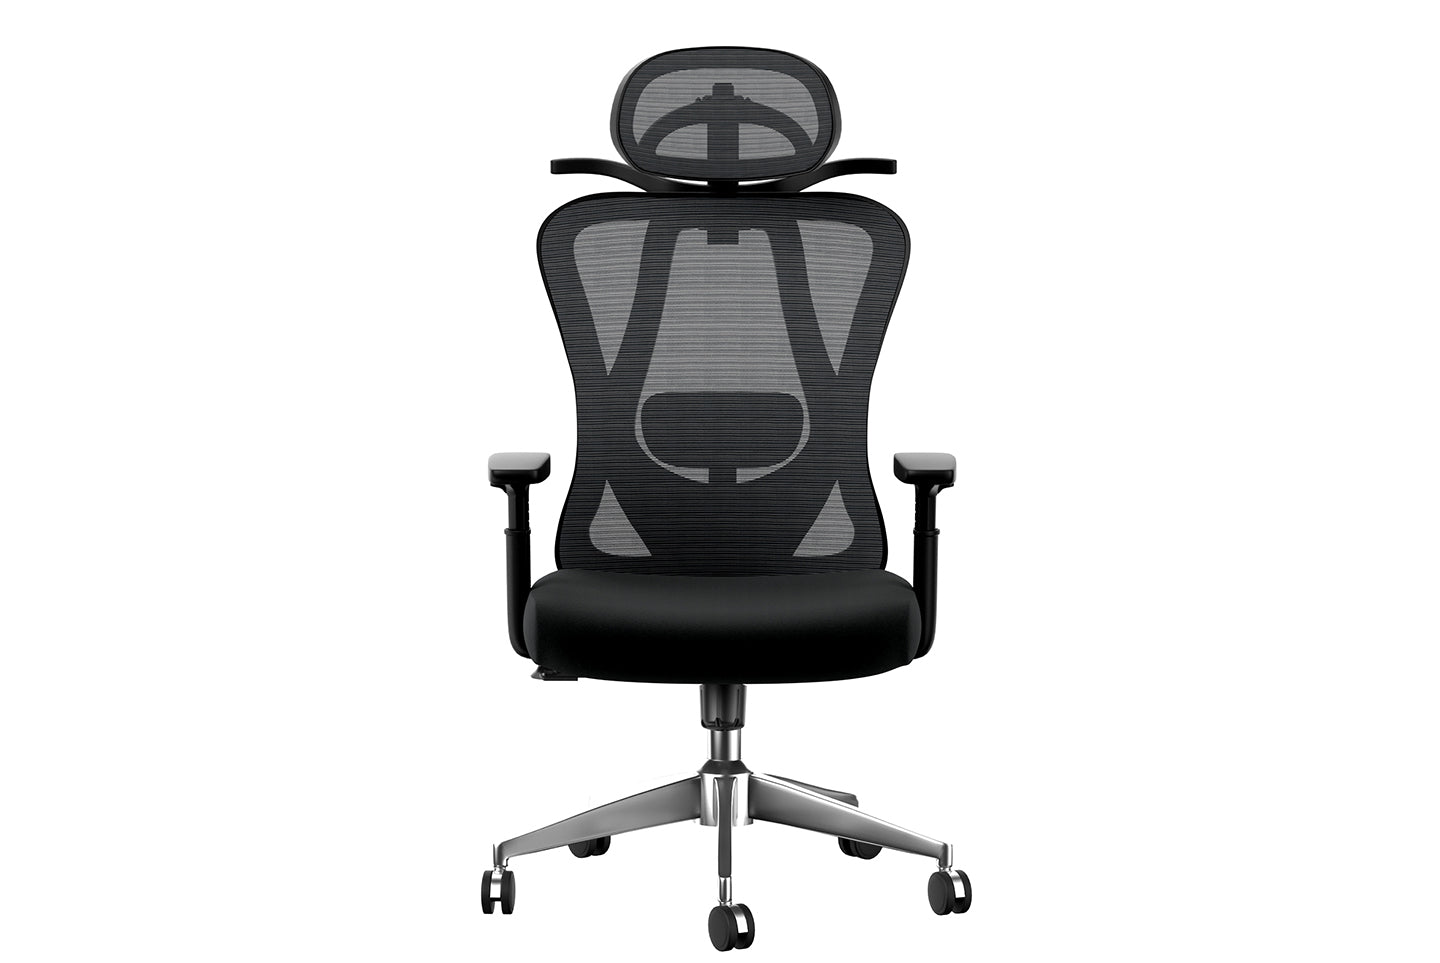 Ergonomic Mesh Office Chair High Back Home Office Desk Chair with Adjustable Headrest, Armrests, Lumbar Support Black